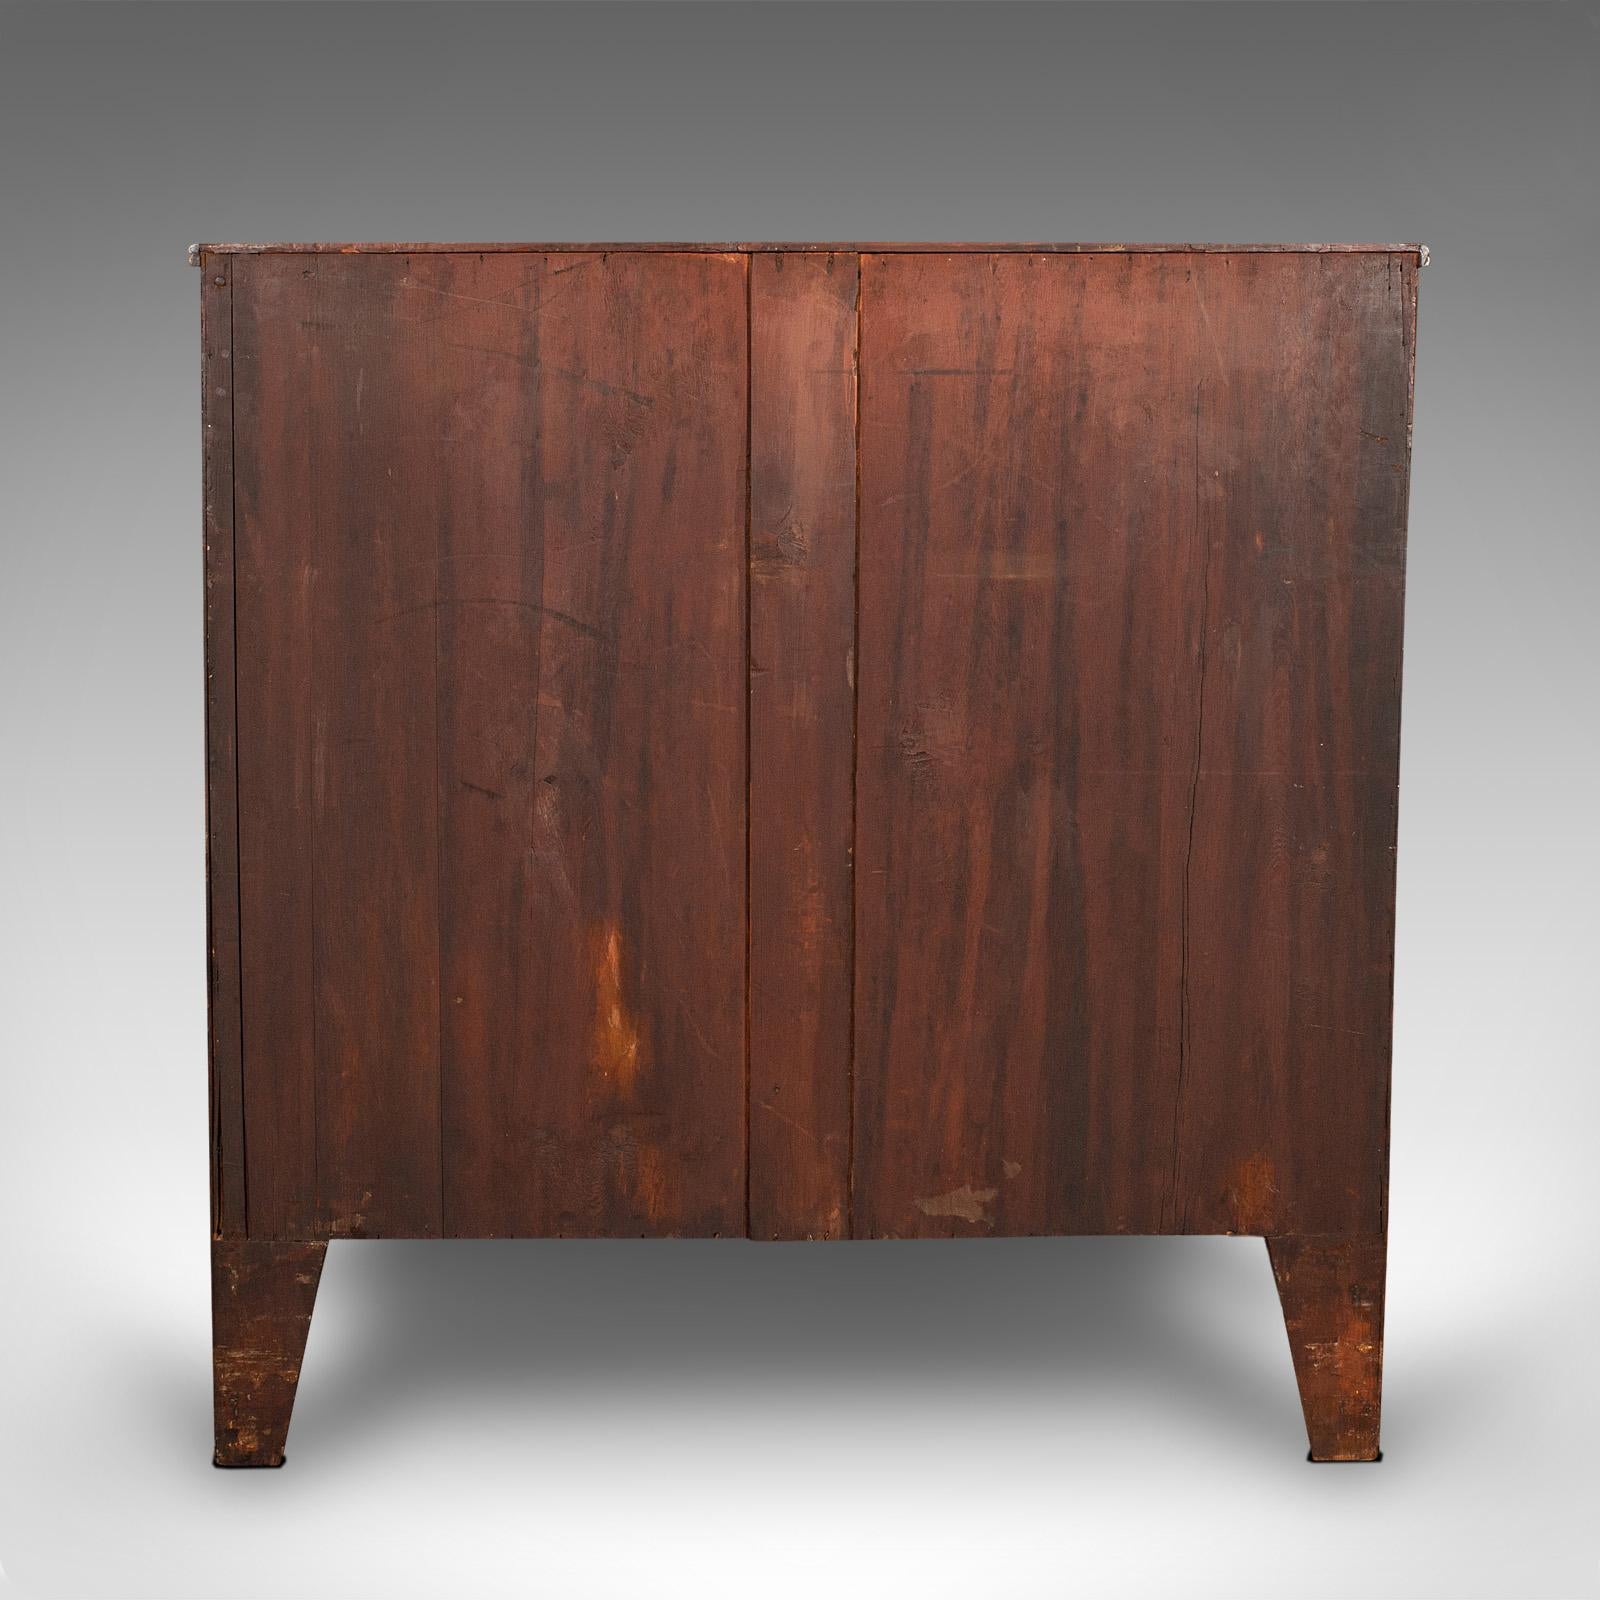 Wood Large Antique Bow Front Chest of Drawers, English, Tallboy, Georgian, Circa 1780